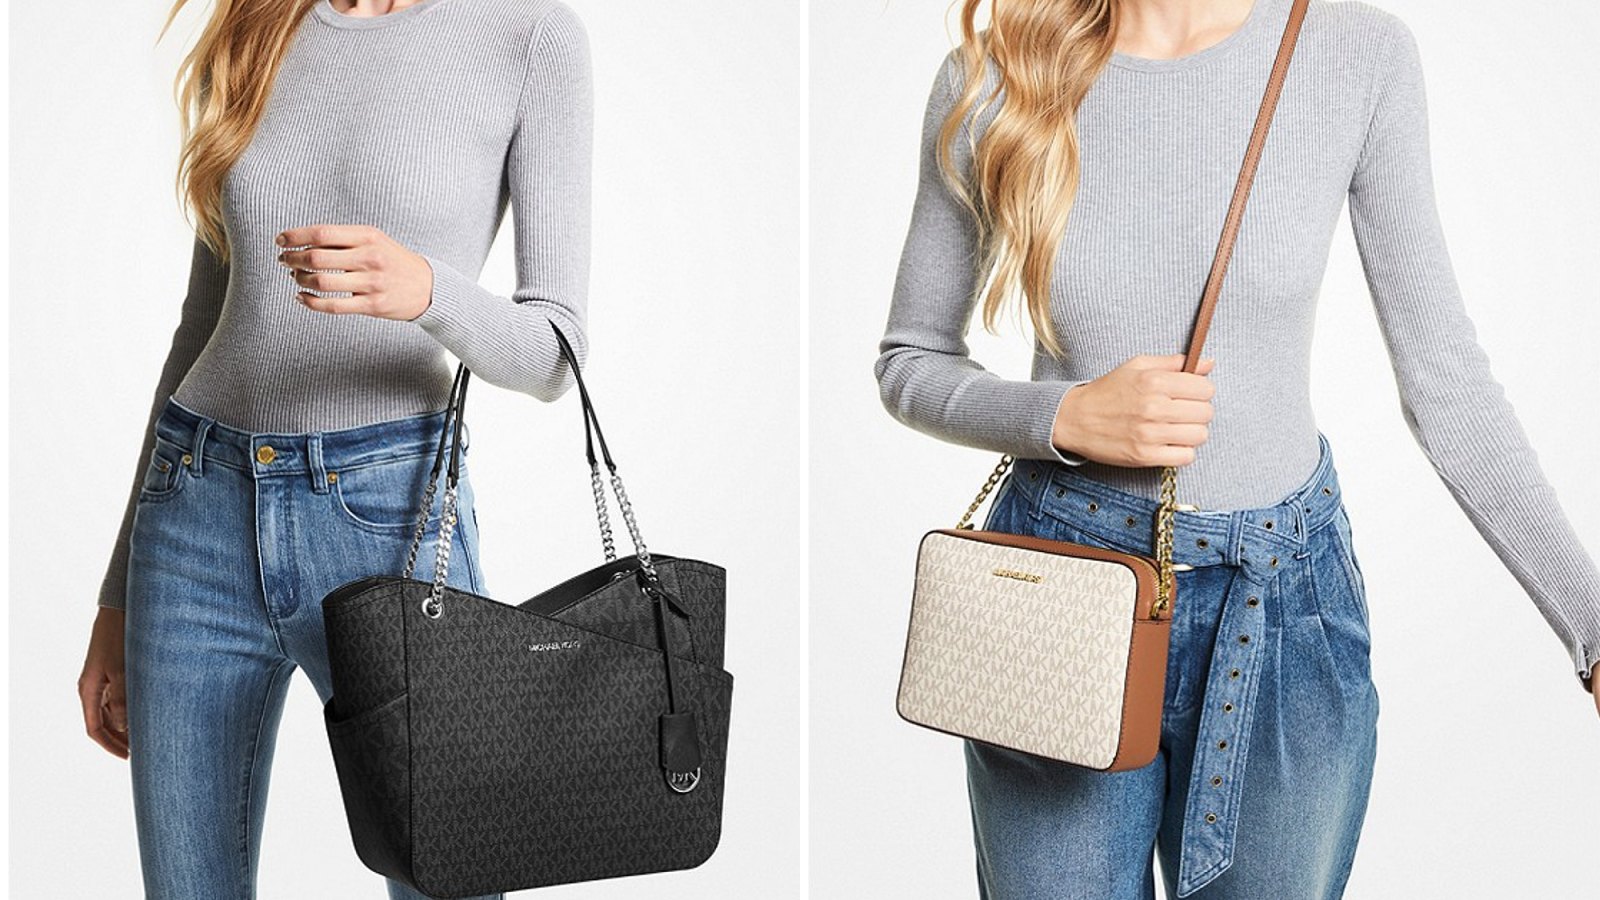 Michael Kors Bestselling Bags Are on Major Sale — Up to 78% Off